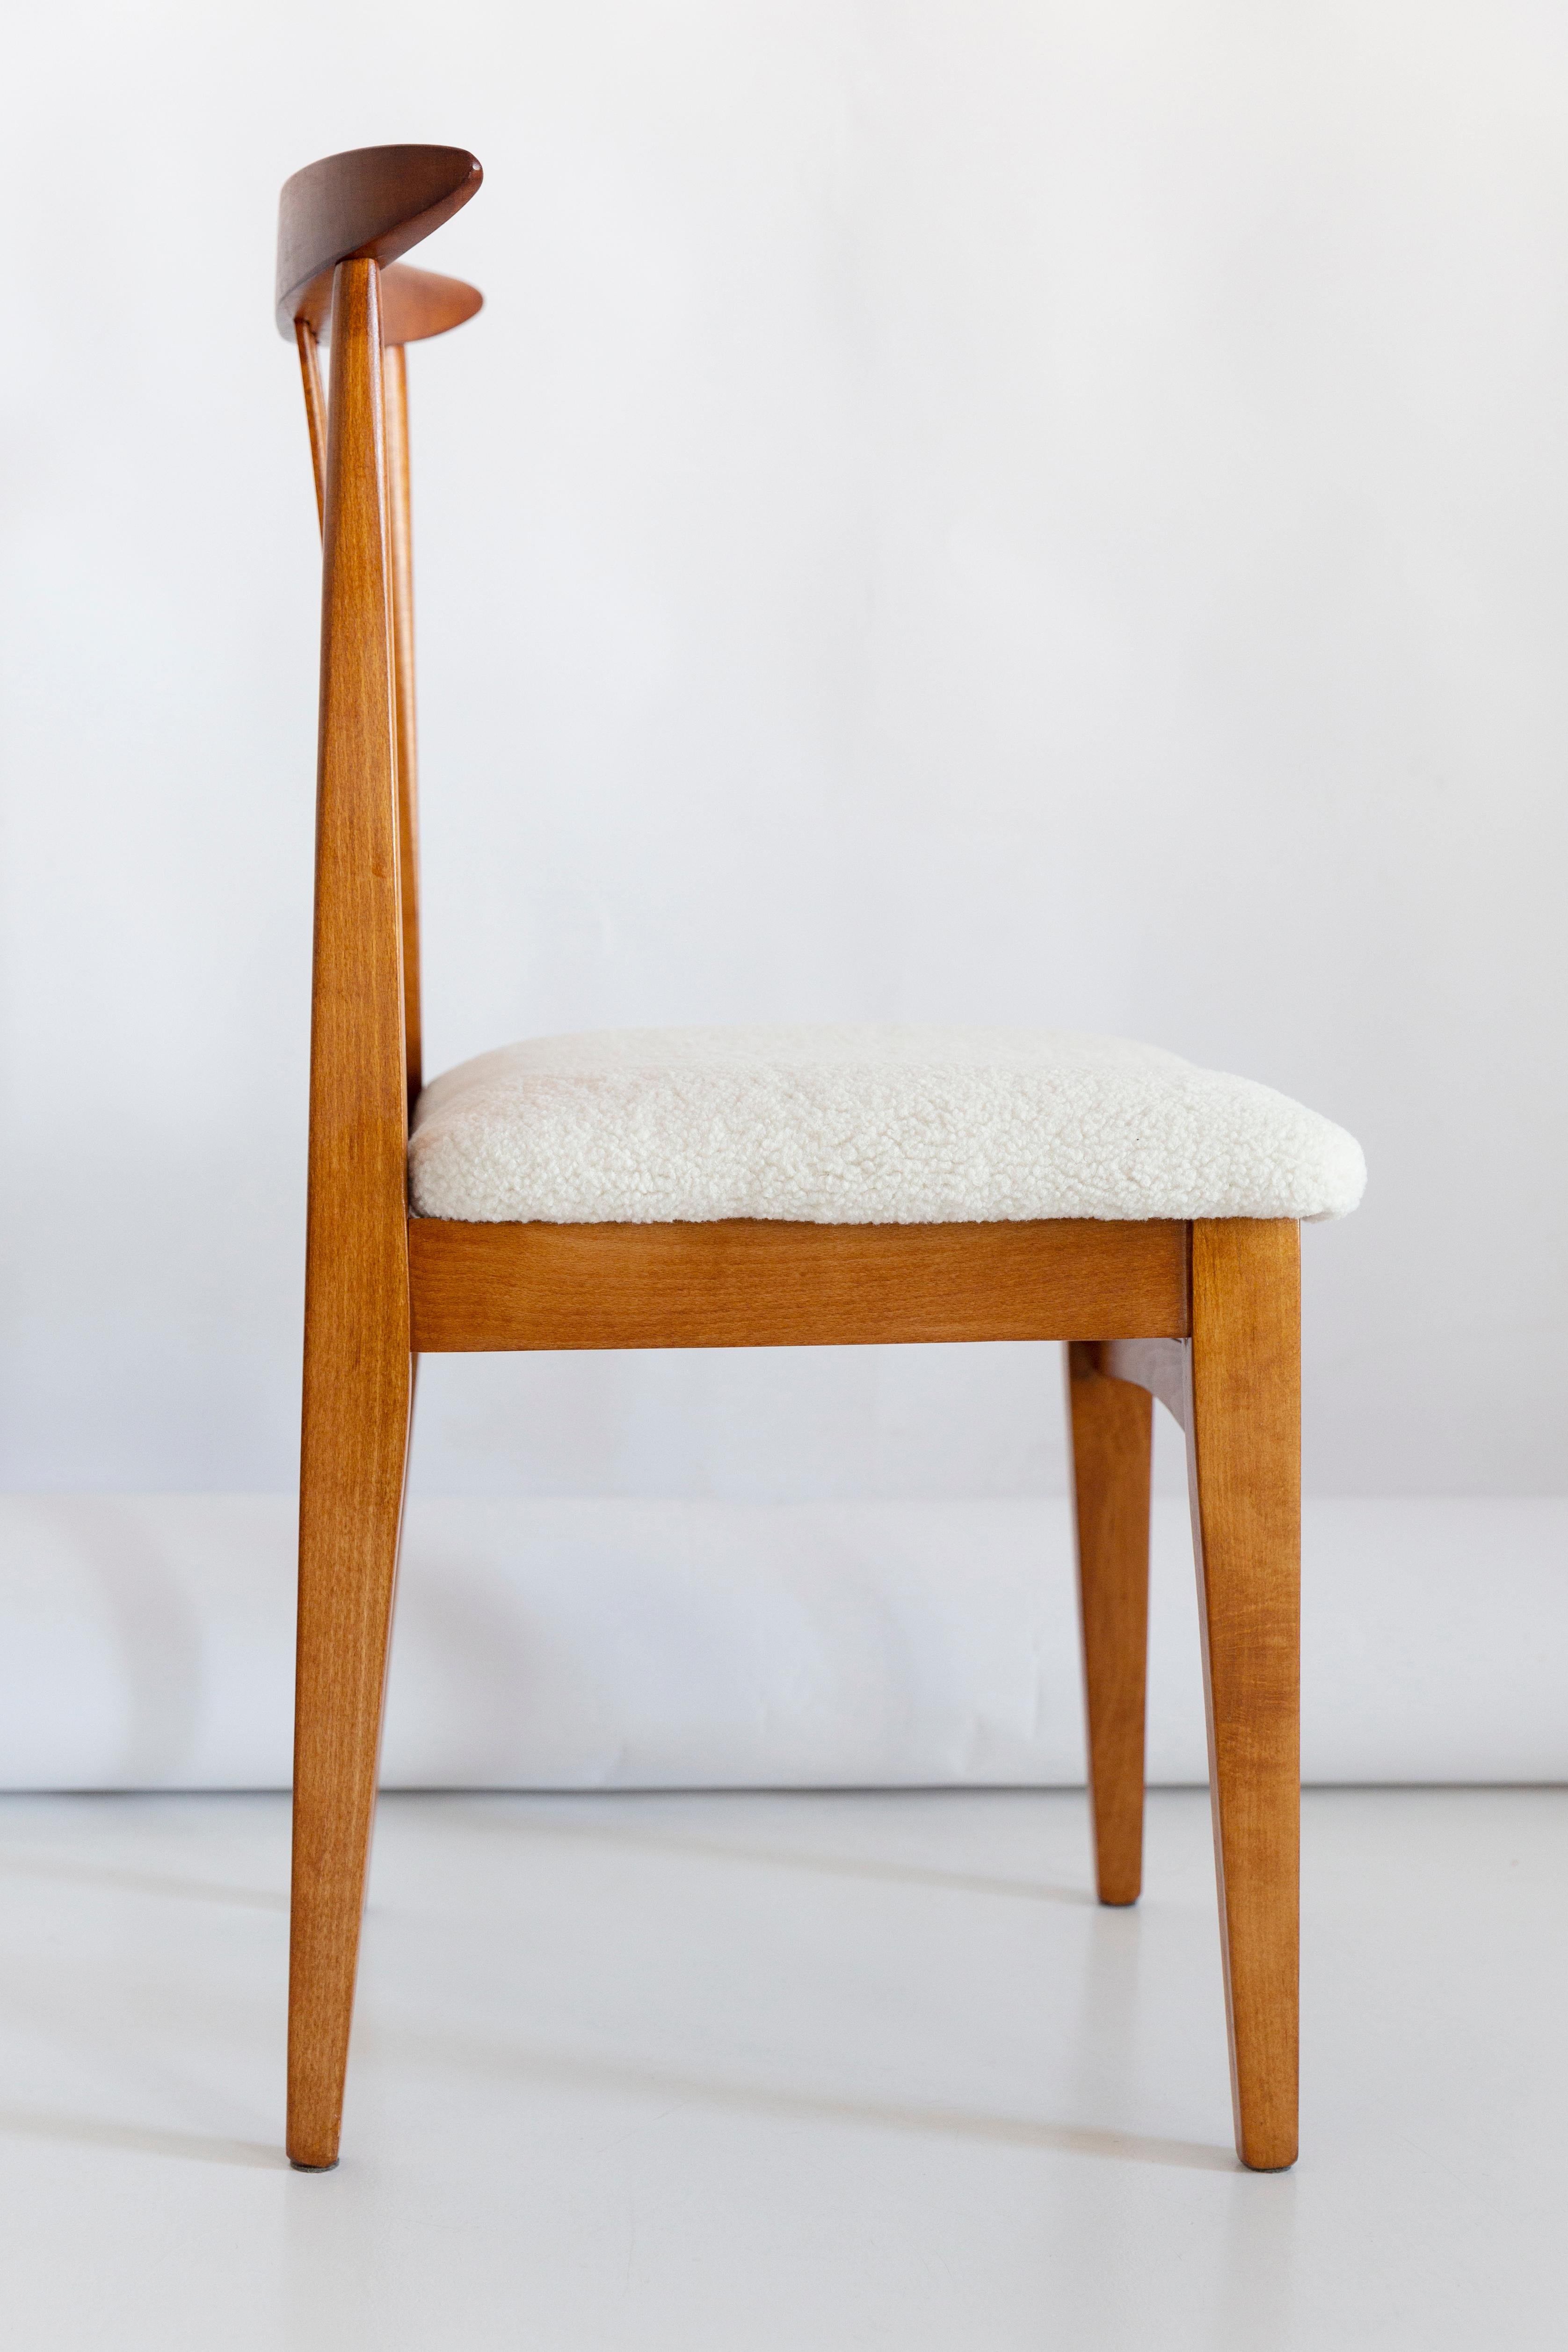 20th Century Mid-Century Modern Light Boucle Chair, Designed by M. Zielinski, Europe, 1960s For Sale